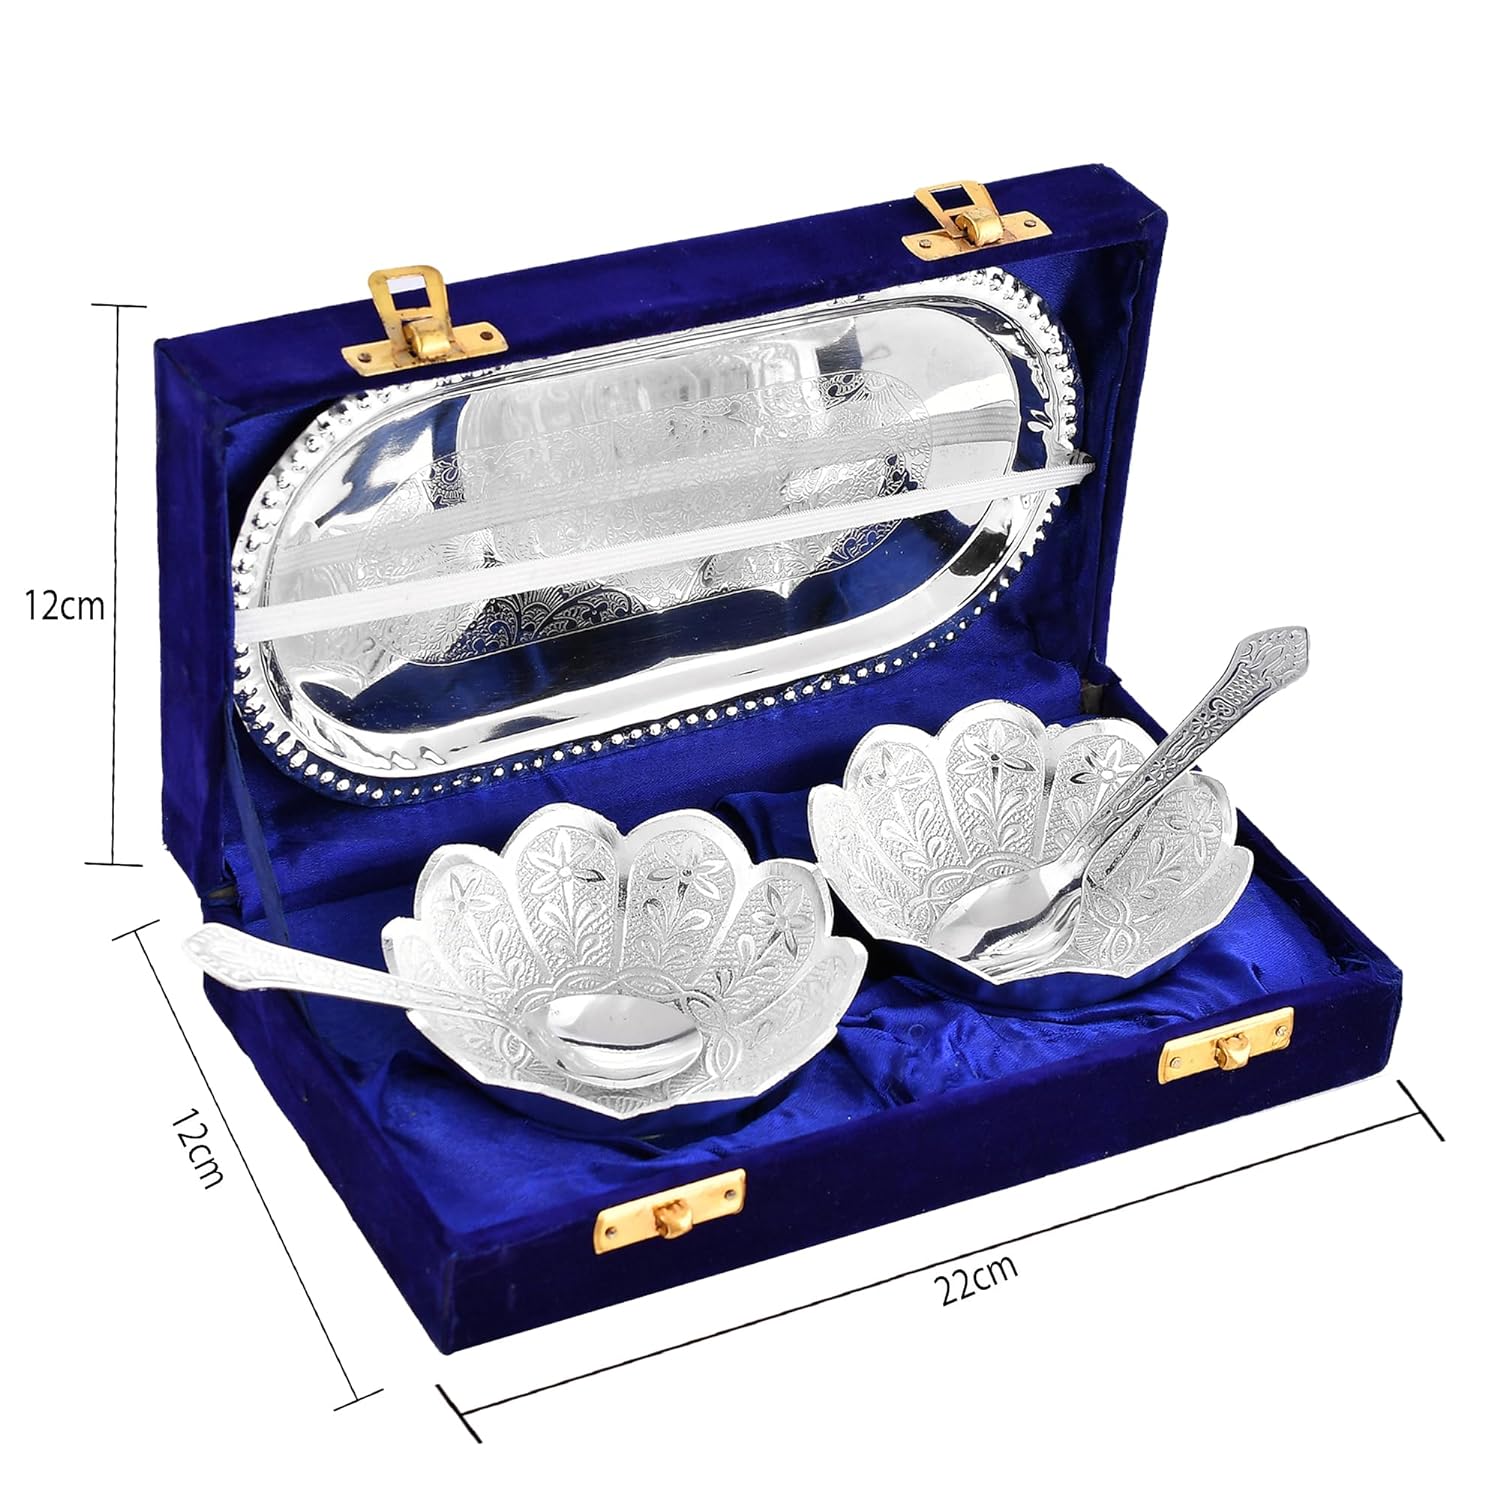 BENGALEN Silver Plated Bowl Spoon Tray Set Dessert Dry Fruits Serving Diwali Christmas Eid Wedding Return Gifts Friends Family Home Decoration Housewarming Corporate Gift Items